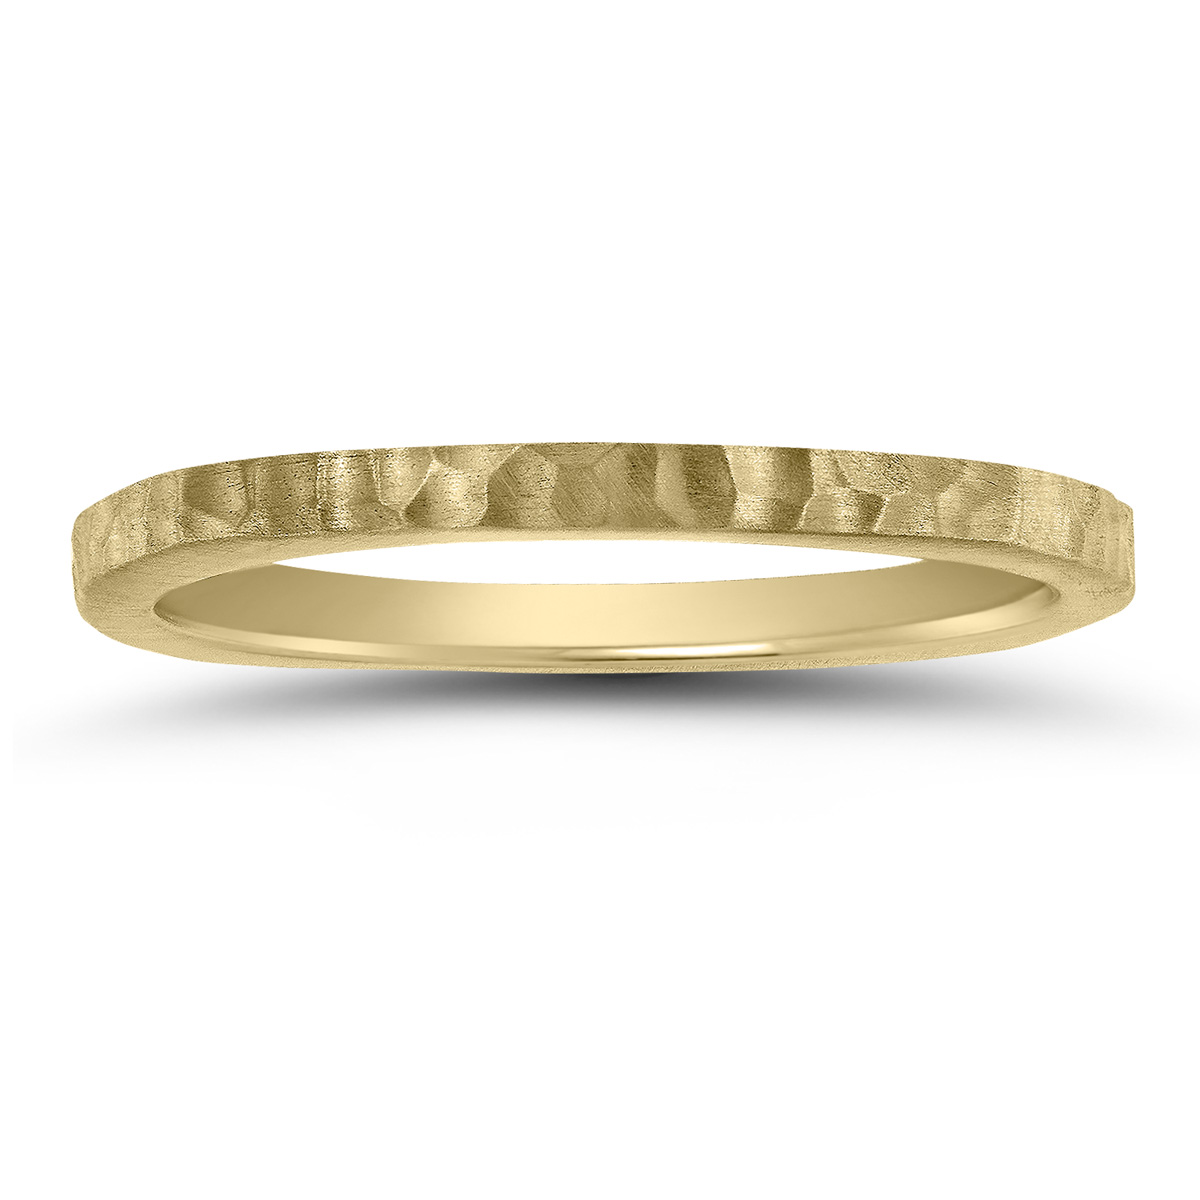 Women's 4 Sided Thin 1.5MM Hammered Wedding Band in 14K Yellow Gold